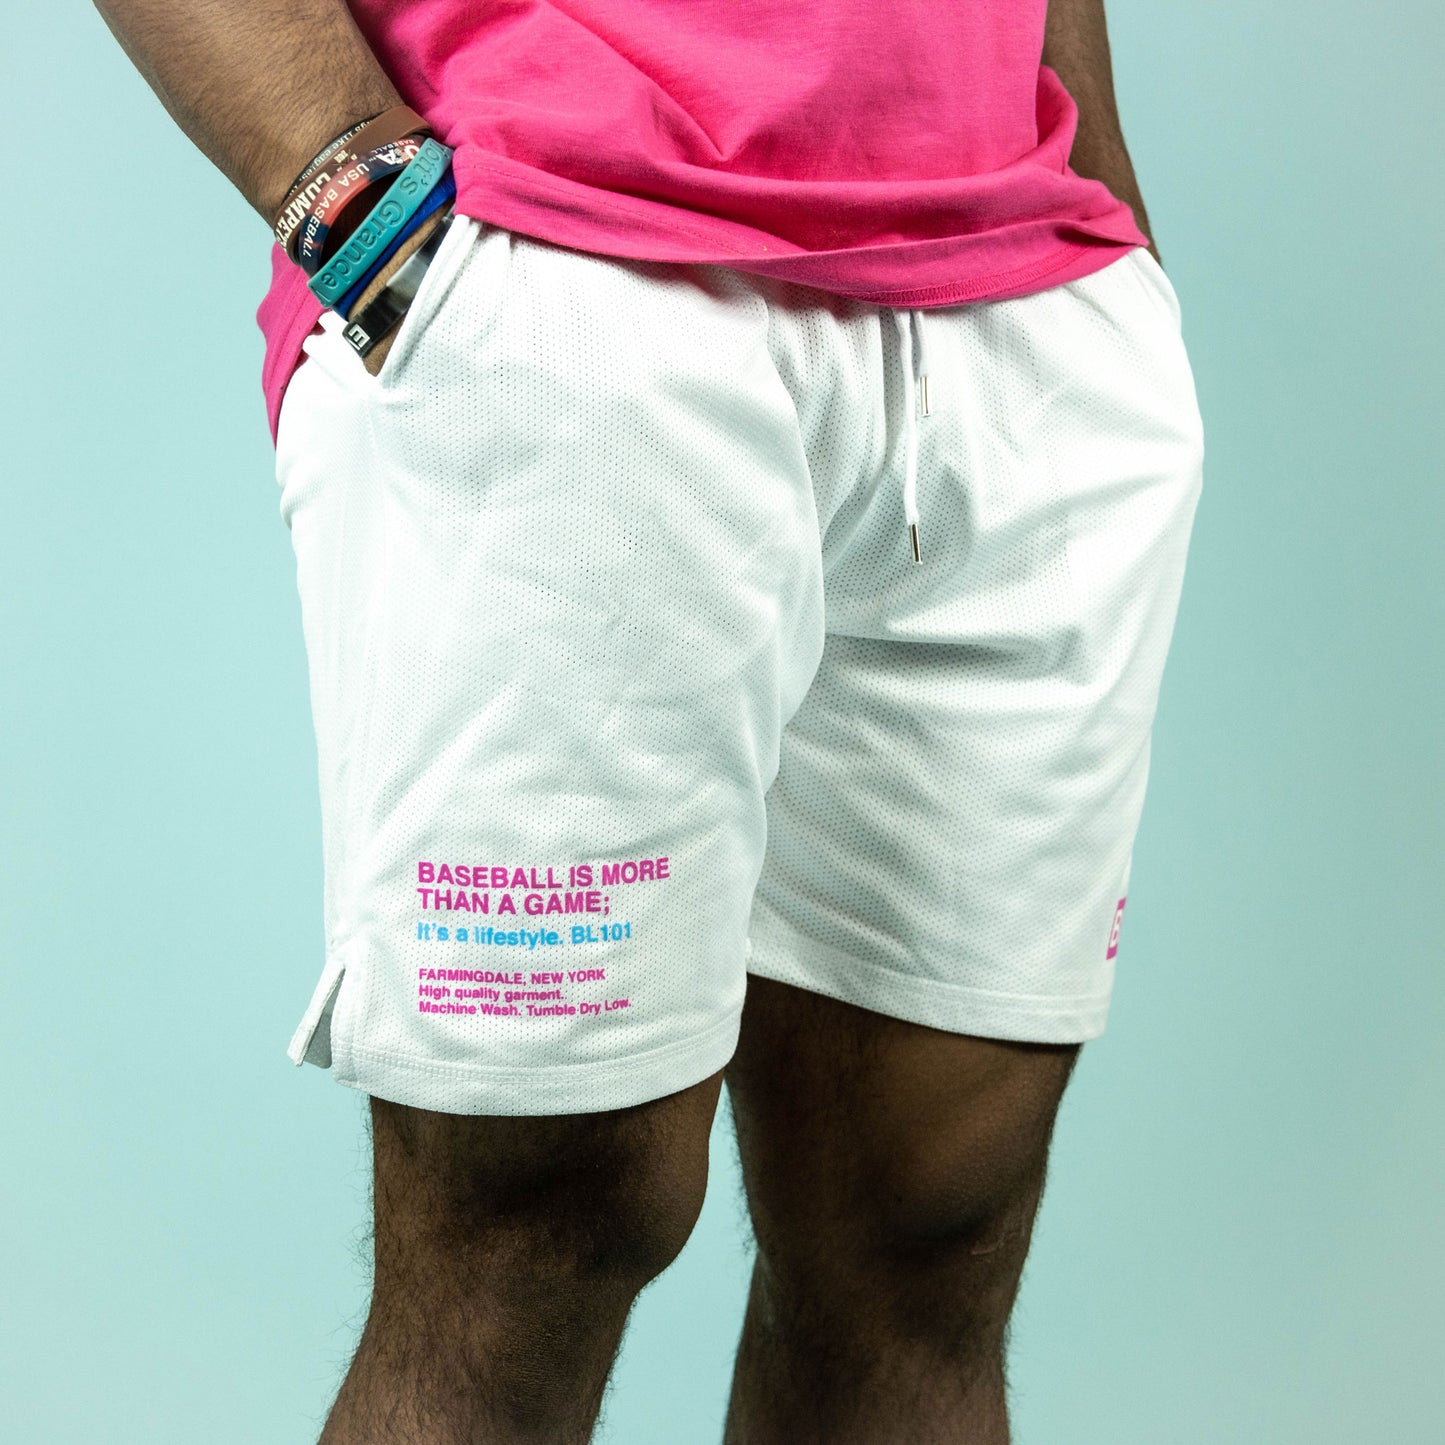 Cotton Candy Youth Shorts